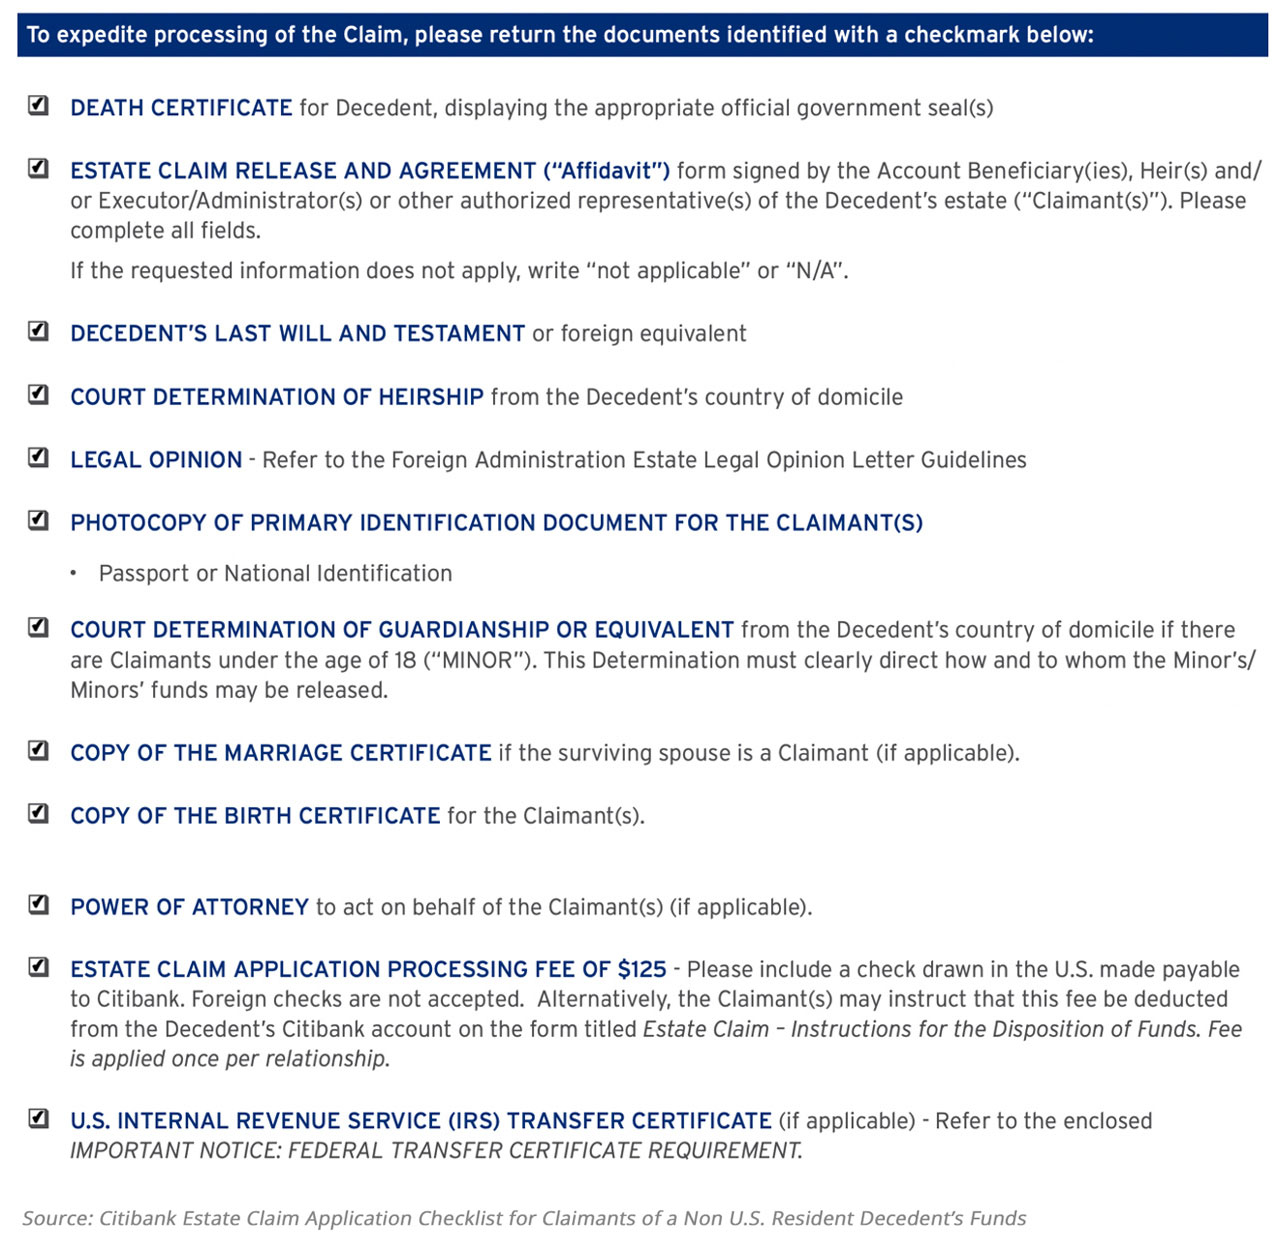 Citibank Estate Claim Application Checklist for Claimants of a Non U.S. Resident Decedent’s Funds 